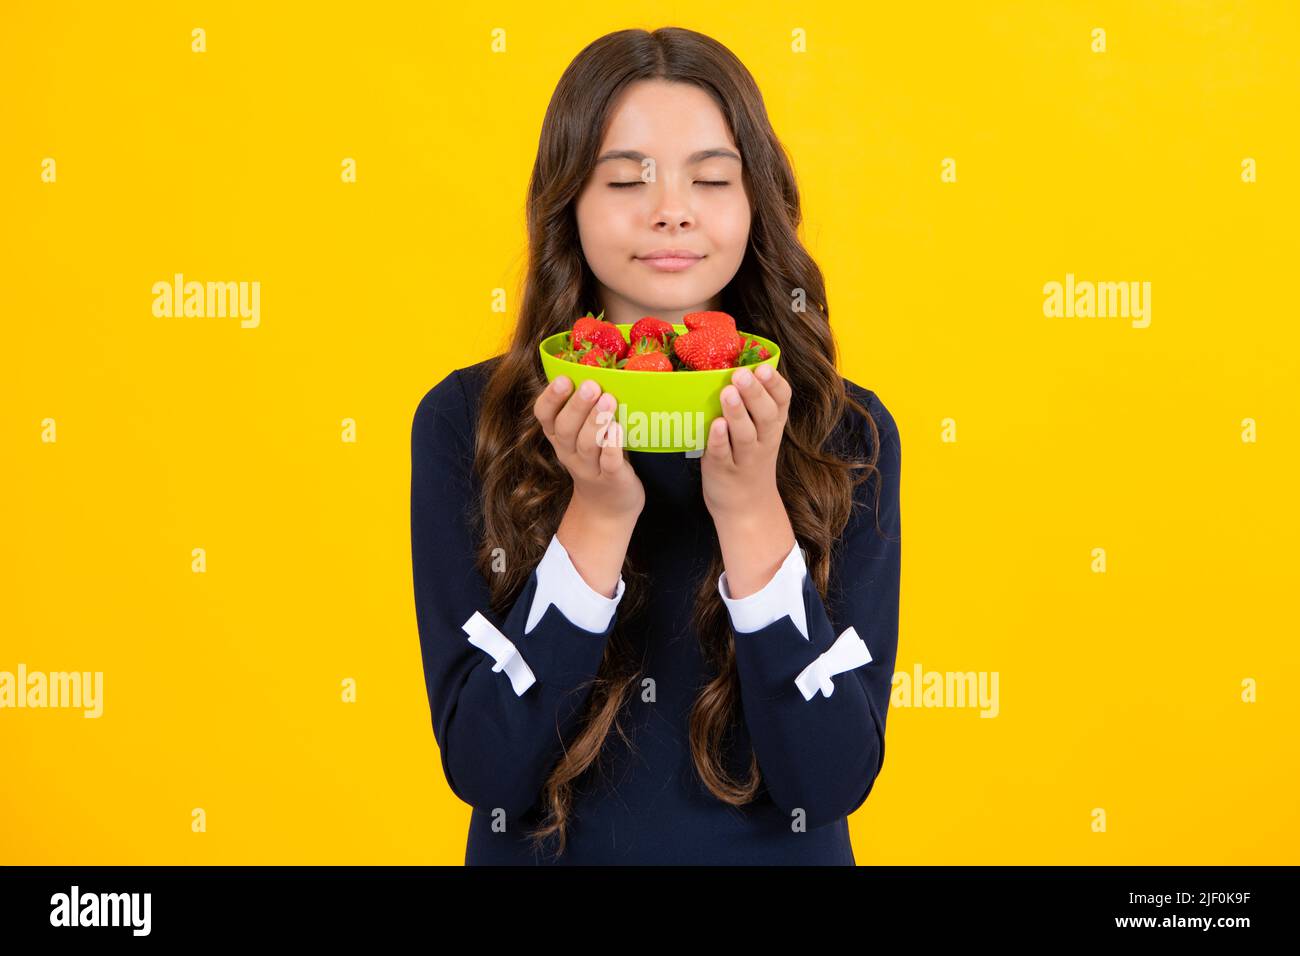 Child eating a strawberries. Happy smiling teen child hold strawberry bowl on yellow background. Healthy natural organic vitamin food for kids Stock Photo